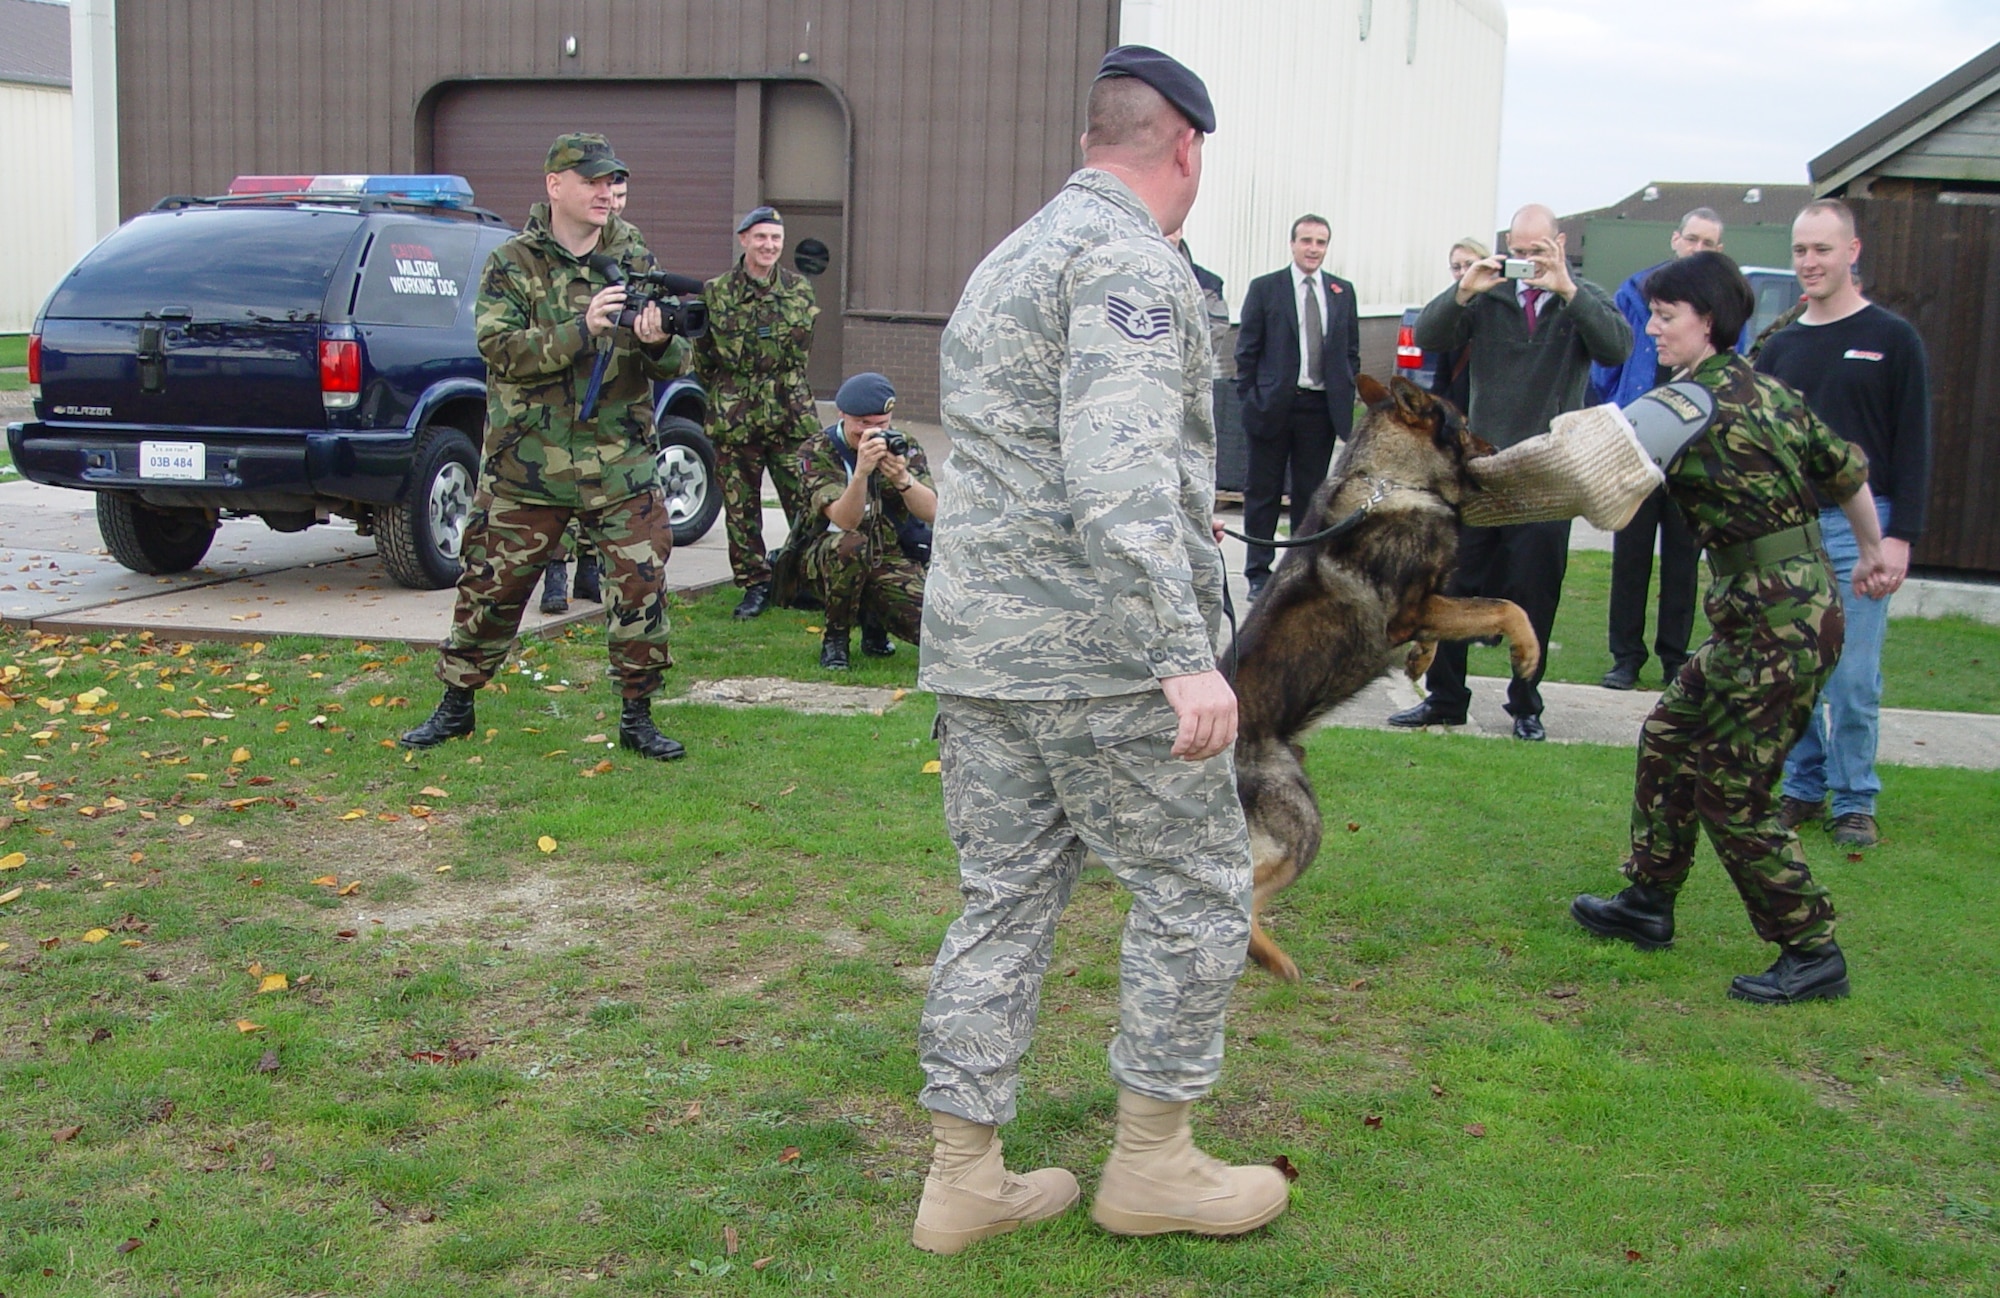 Staff Sgt. Ryan Purvis’ ‘War,’ a K-9 military working dog, provides a once-in-a-lifetime training experience for Officer Cadet Lesley Woods, 7644 (VR) Squadron, Royal Auxiliary Air Force, Saturday. (U.S. Air Force photo by Master Sgt. Dennis Brewer)